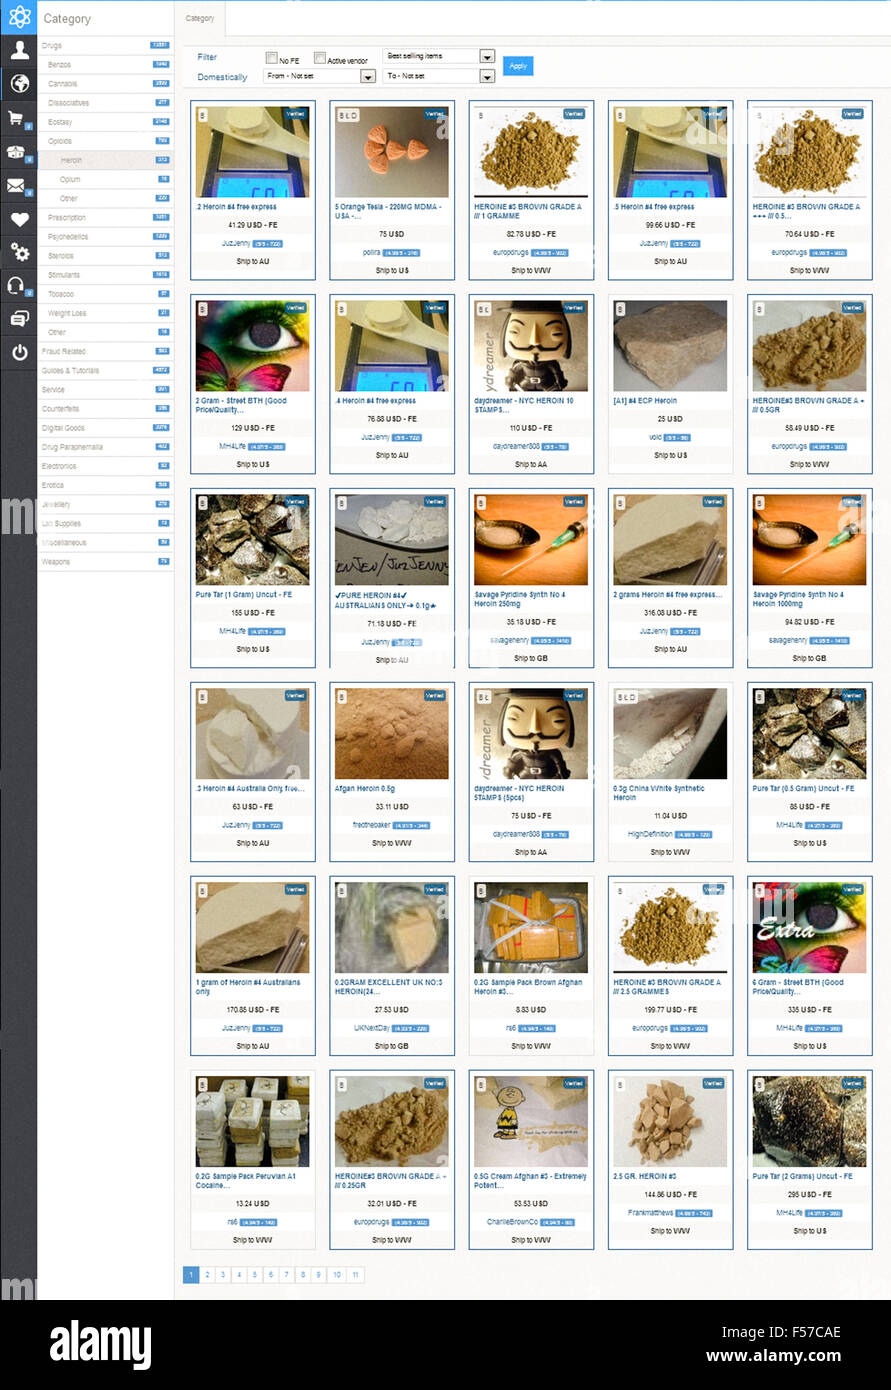 Nucleus Marketplace for illicit goods (drugs, counterfeits, weapons) accessed through the darknet (Tor network). Opioids, heroin subcategory page shown with images of various types of heroin on offer. Nucleus established 24 November 2015, photograph taken: October 2015. Stock Photo